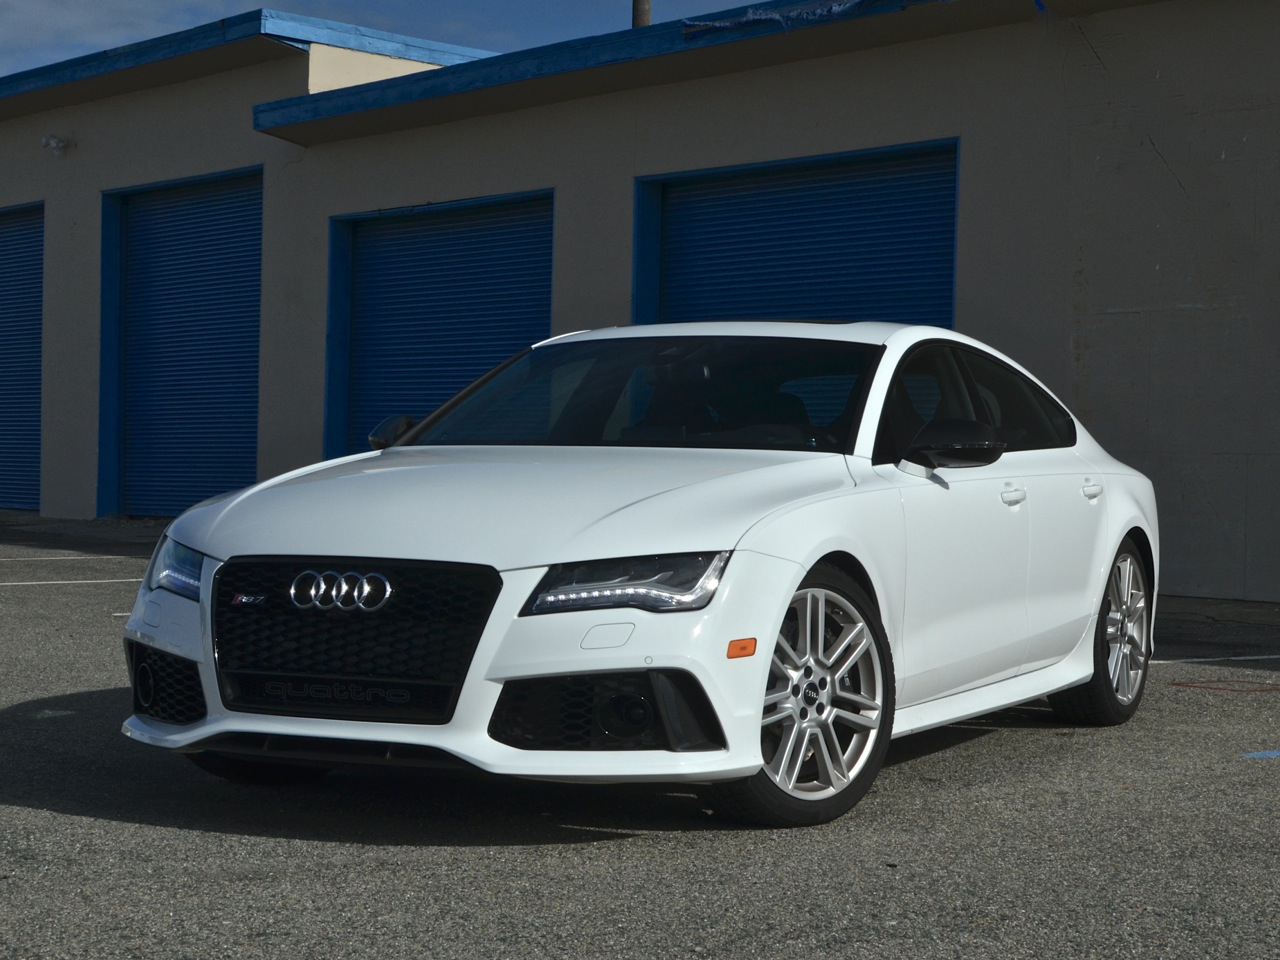 2014 Audi RS 7 Quattro review: Top-tier RS 7 is a tech car in track-ready  trim - CNET